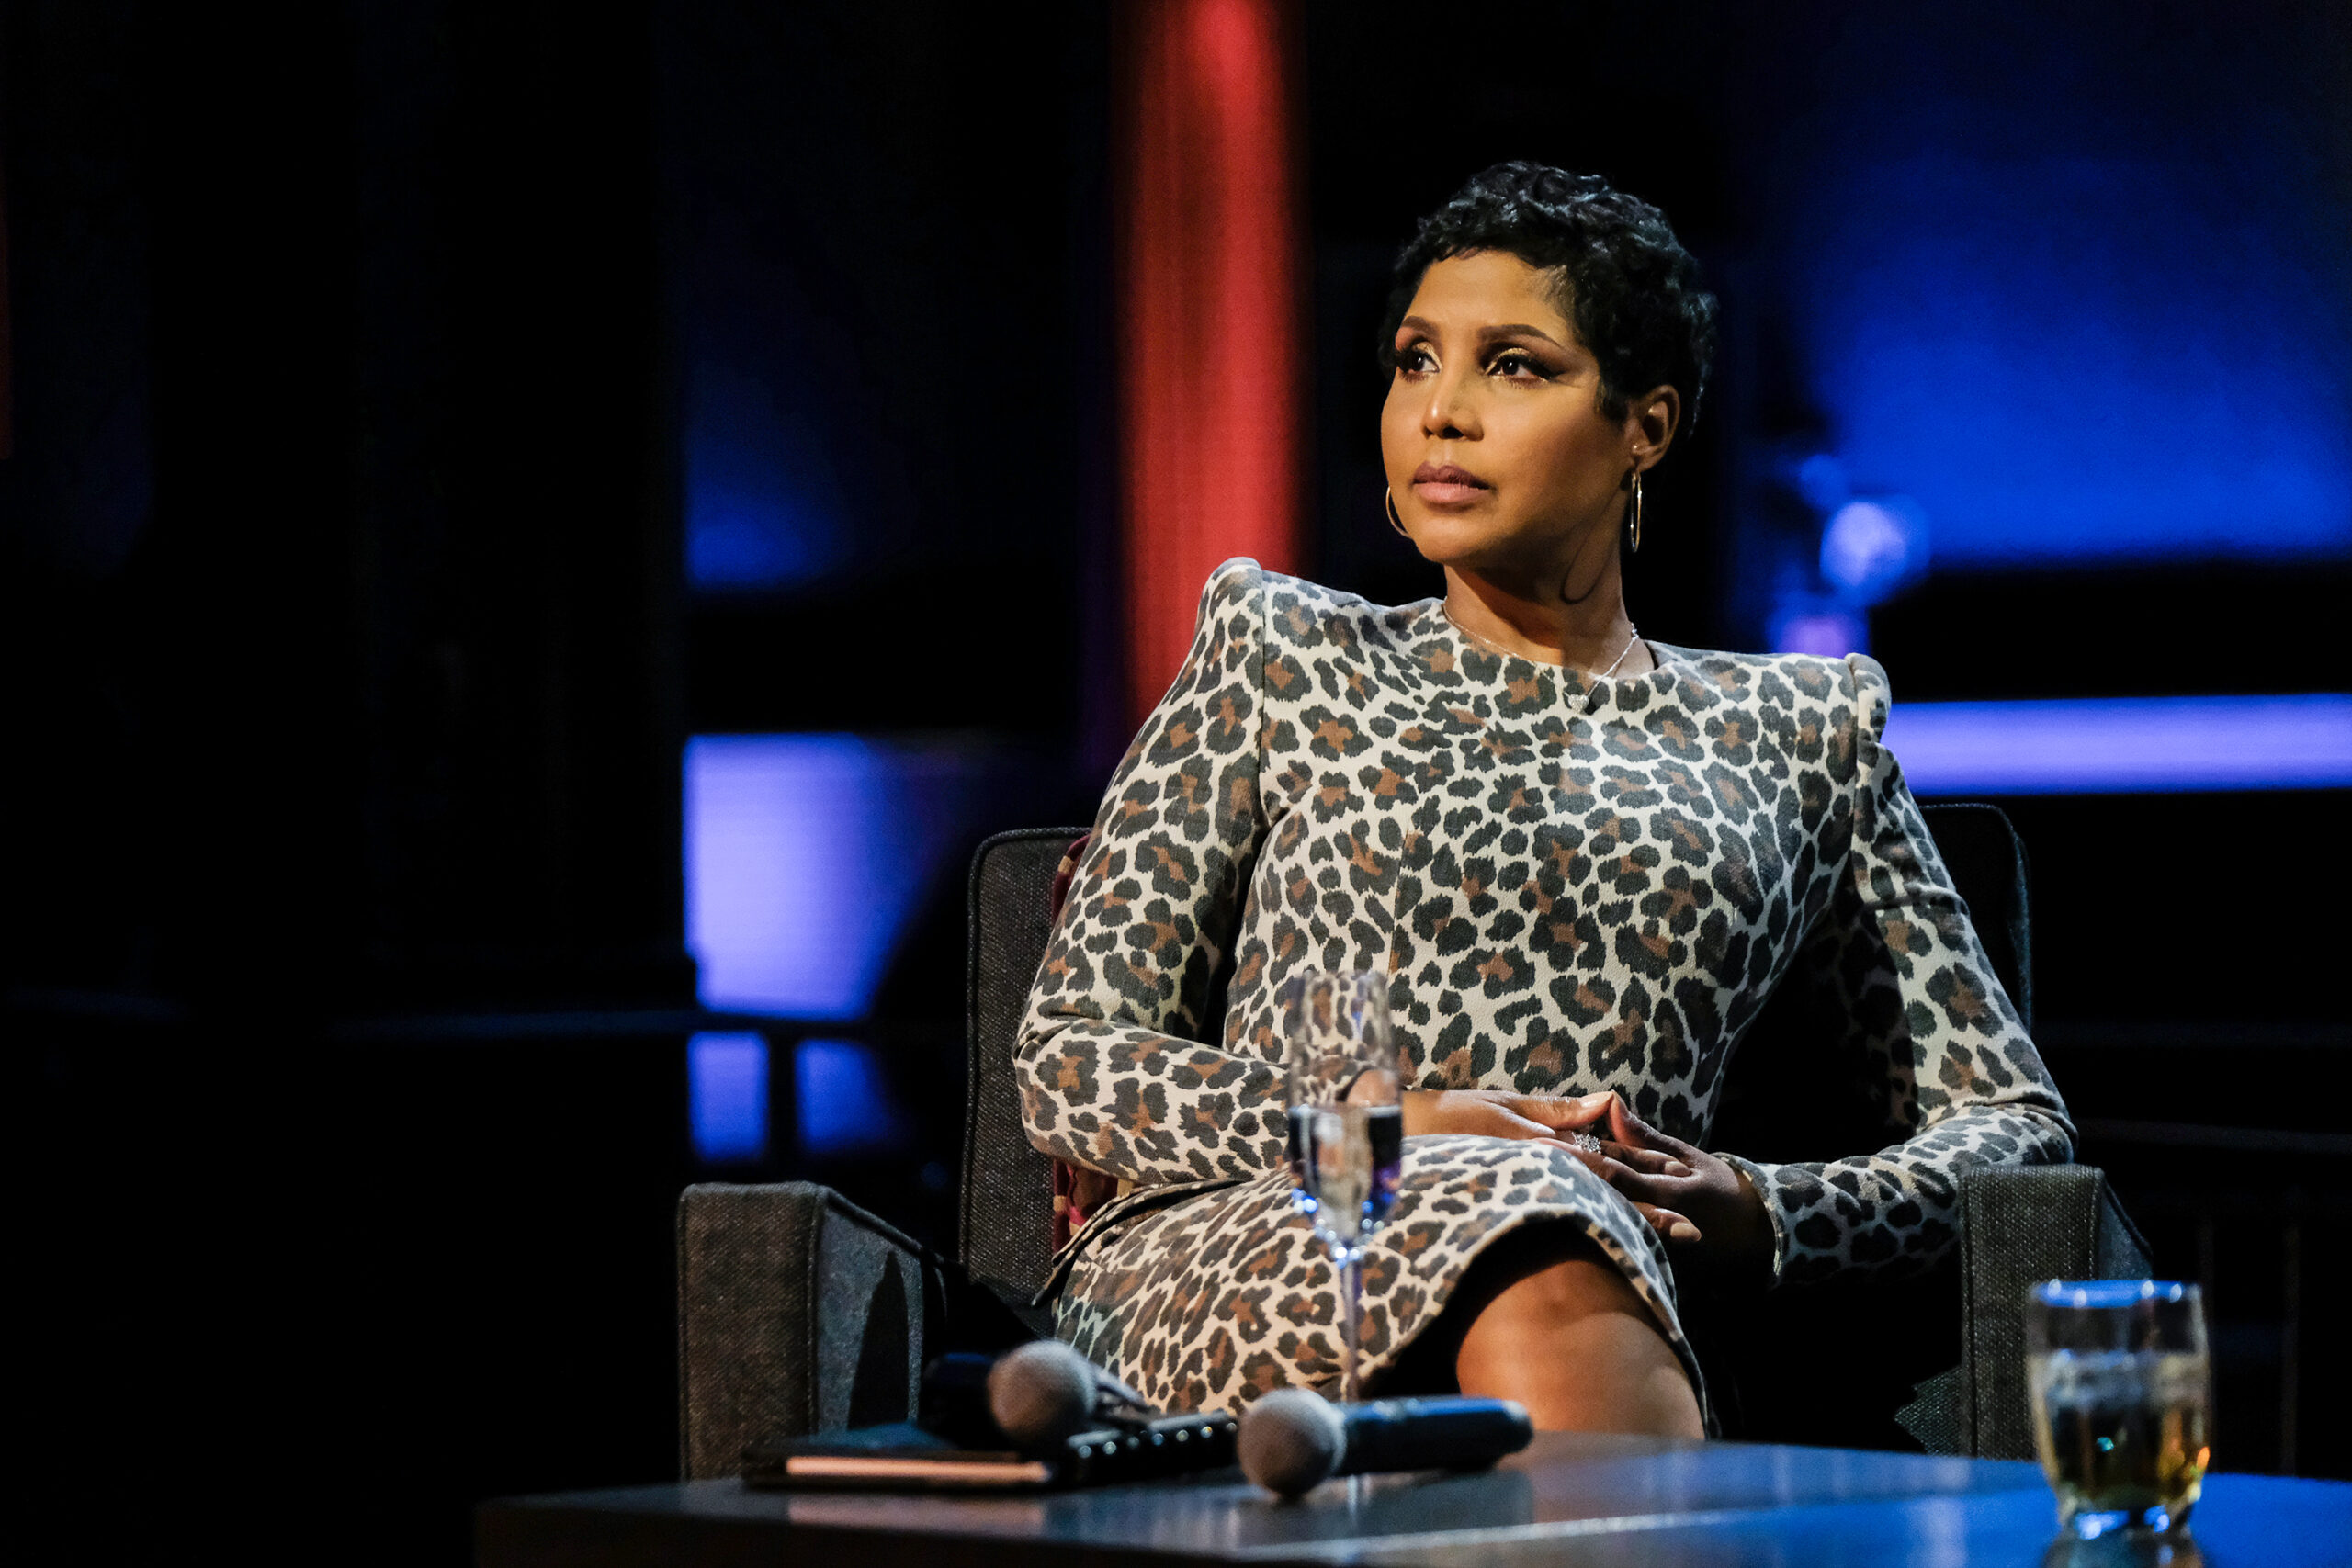 Toni Braxton's Inspiring Story Ends With A $10 Million Net Worth